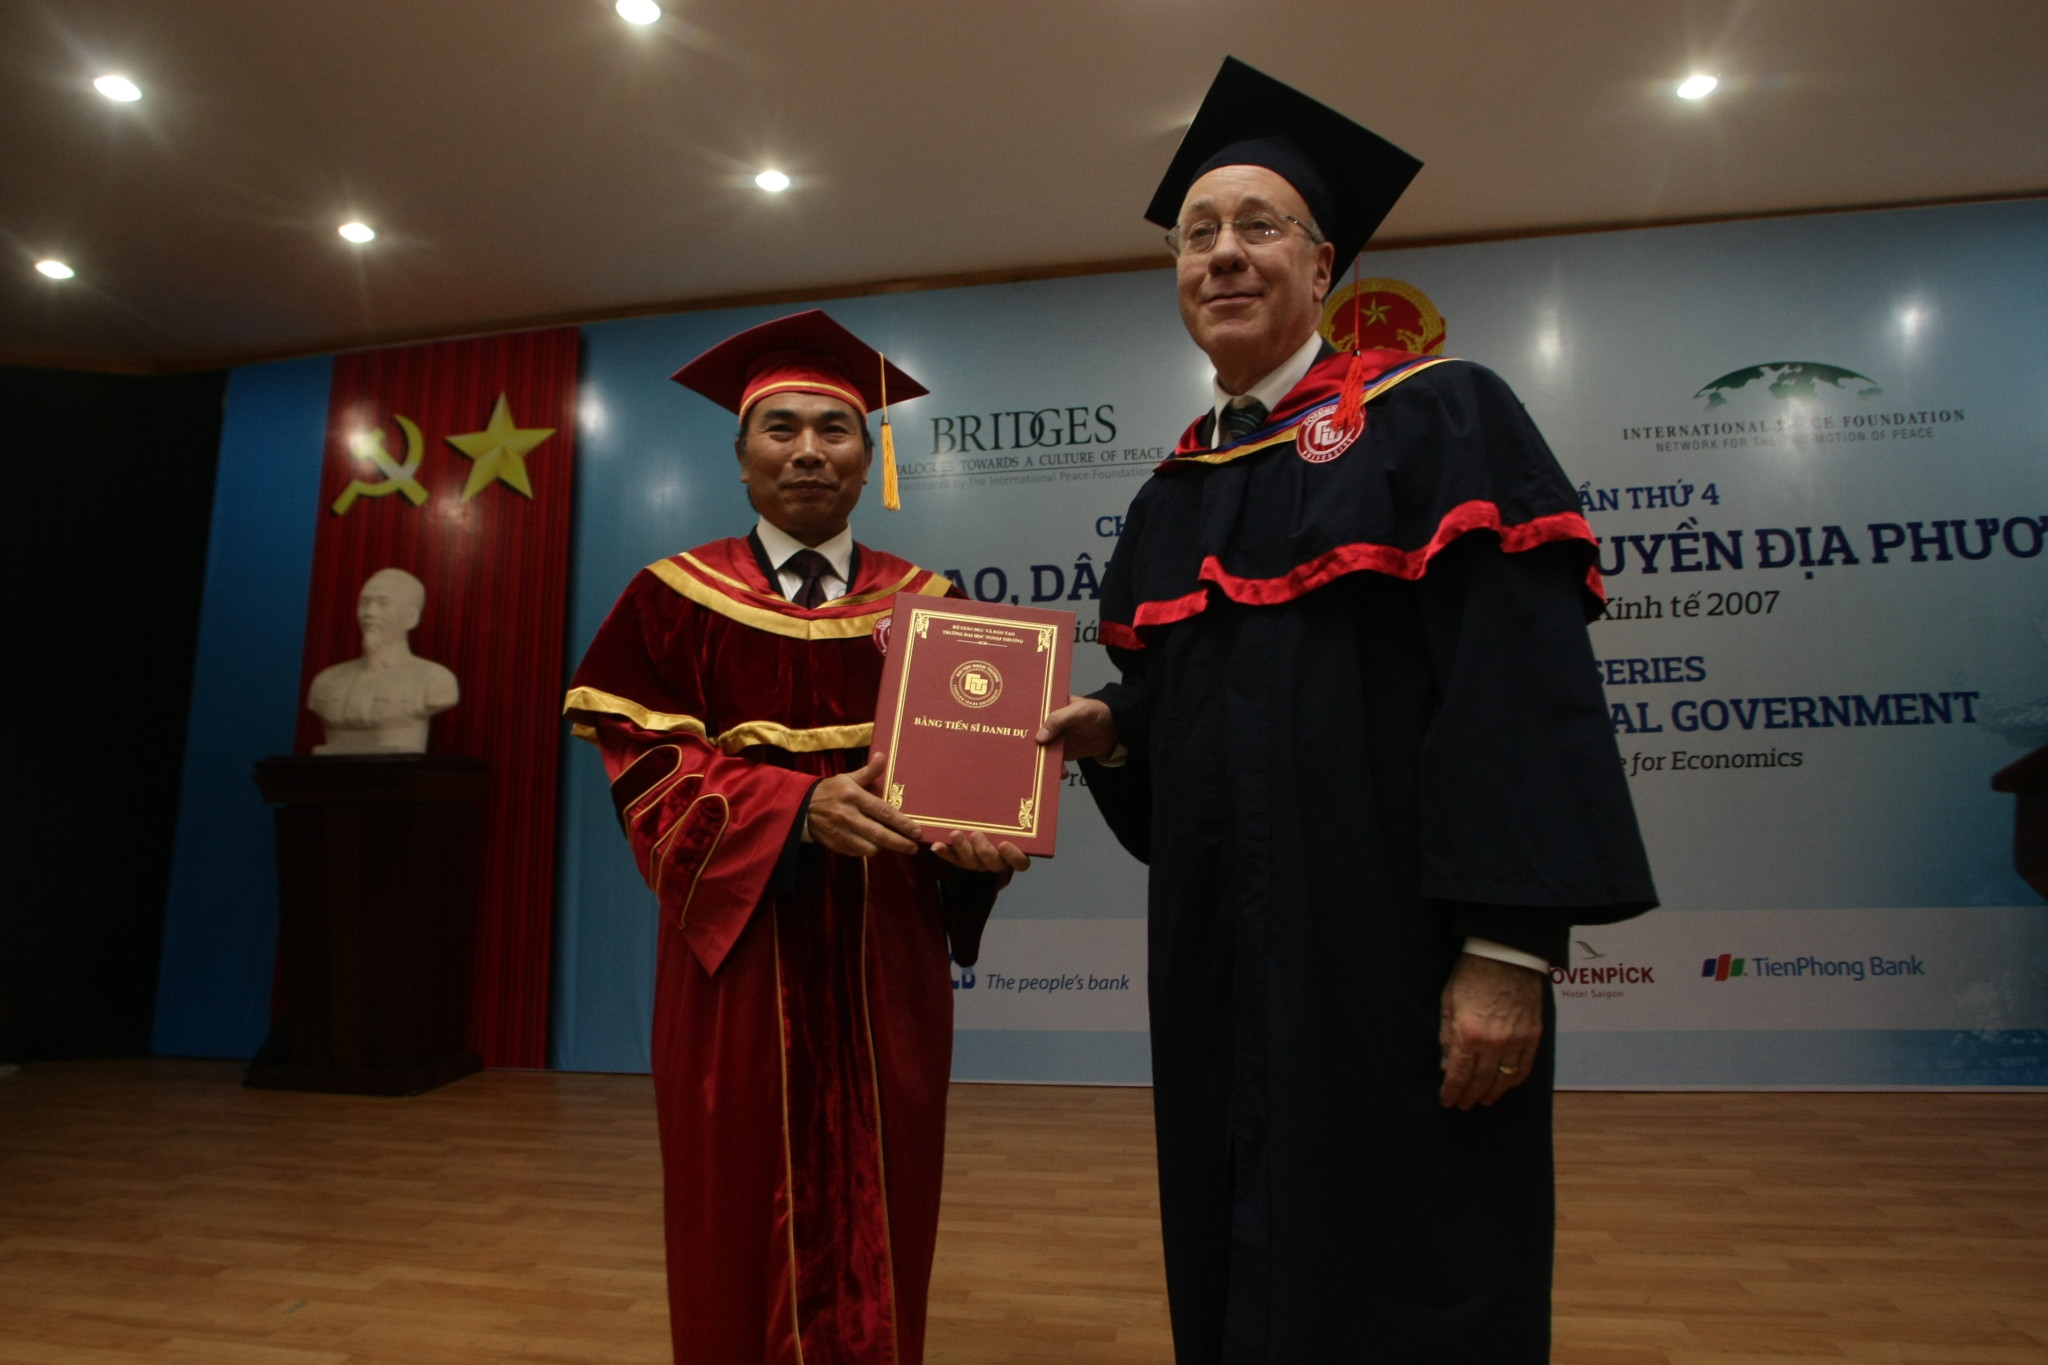 Economics Nobel Laureate Prof. Roger B. Myerson being awarded an honorary doctorate degree in Hanoi